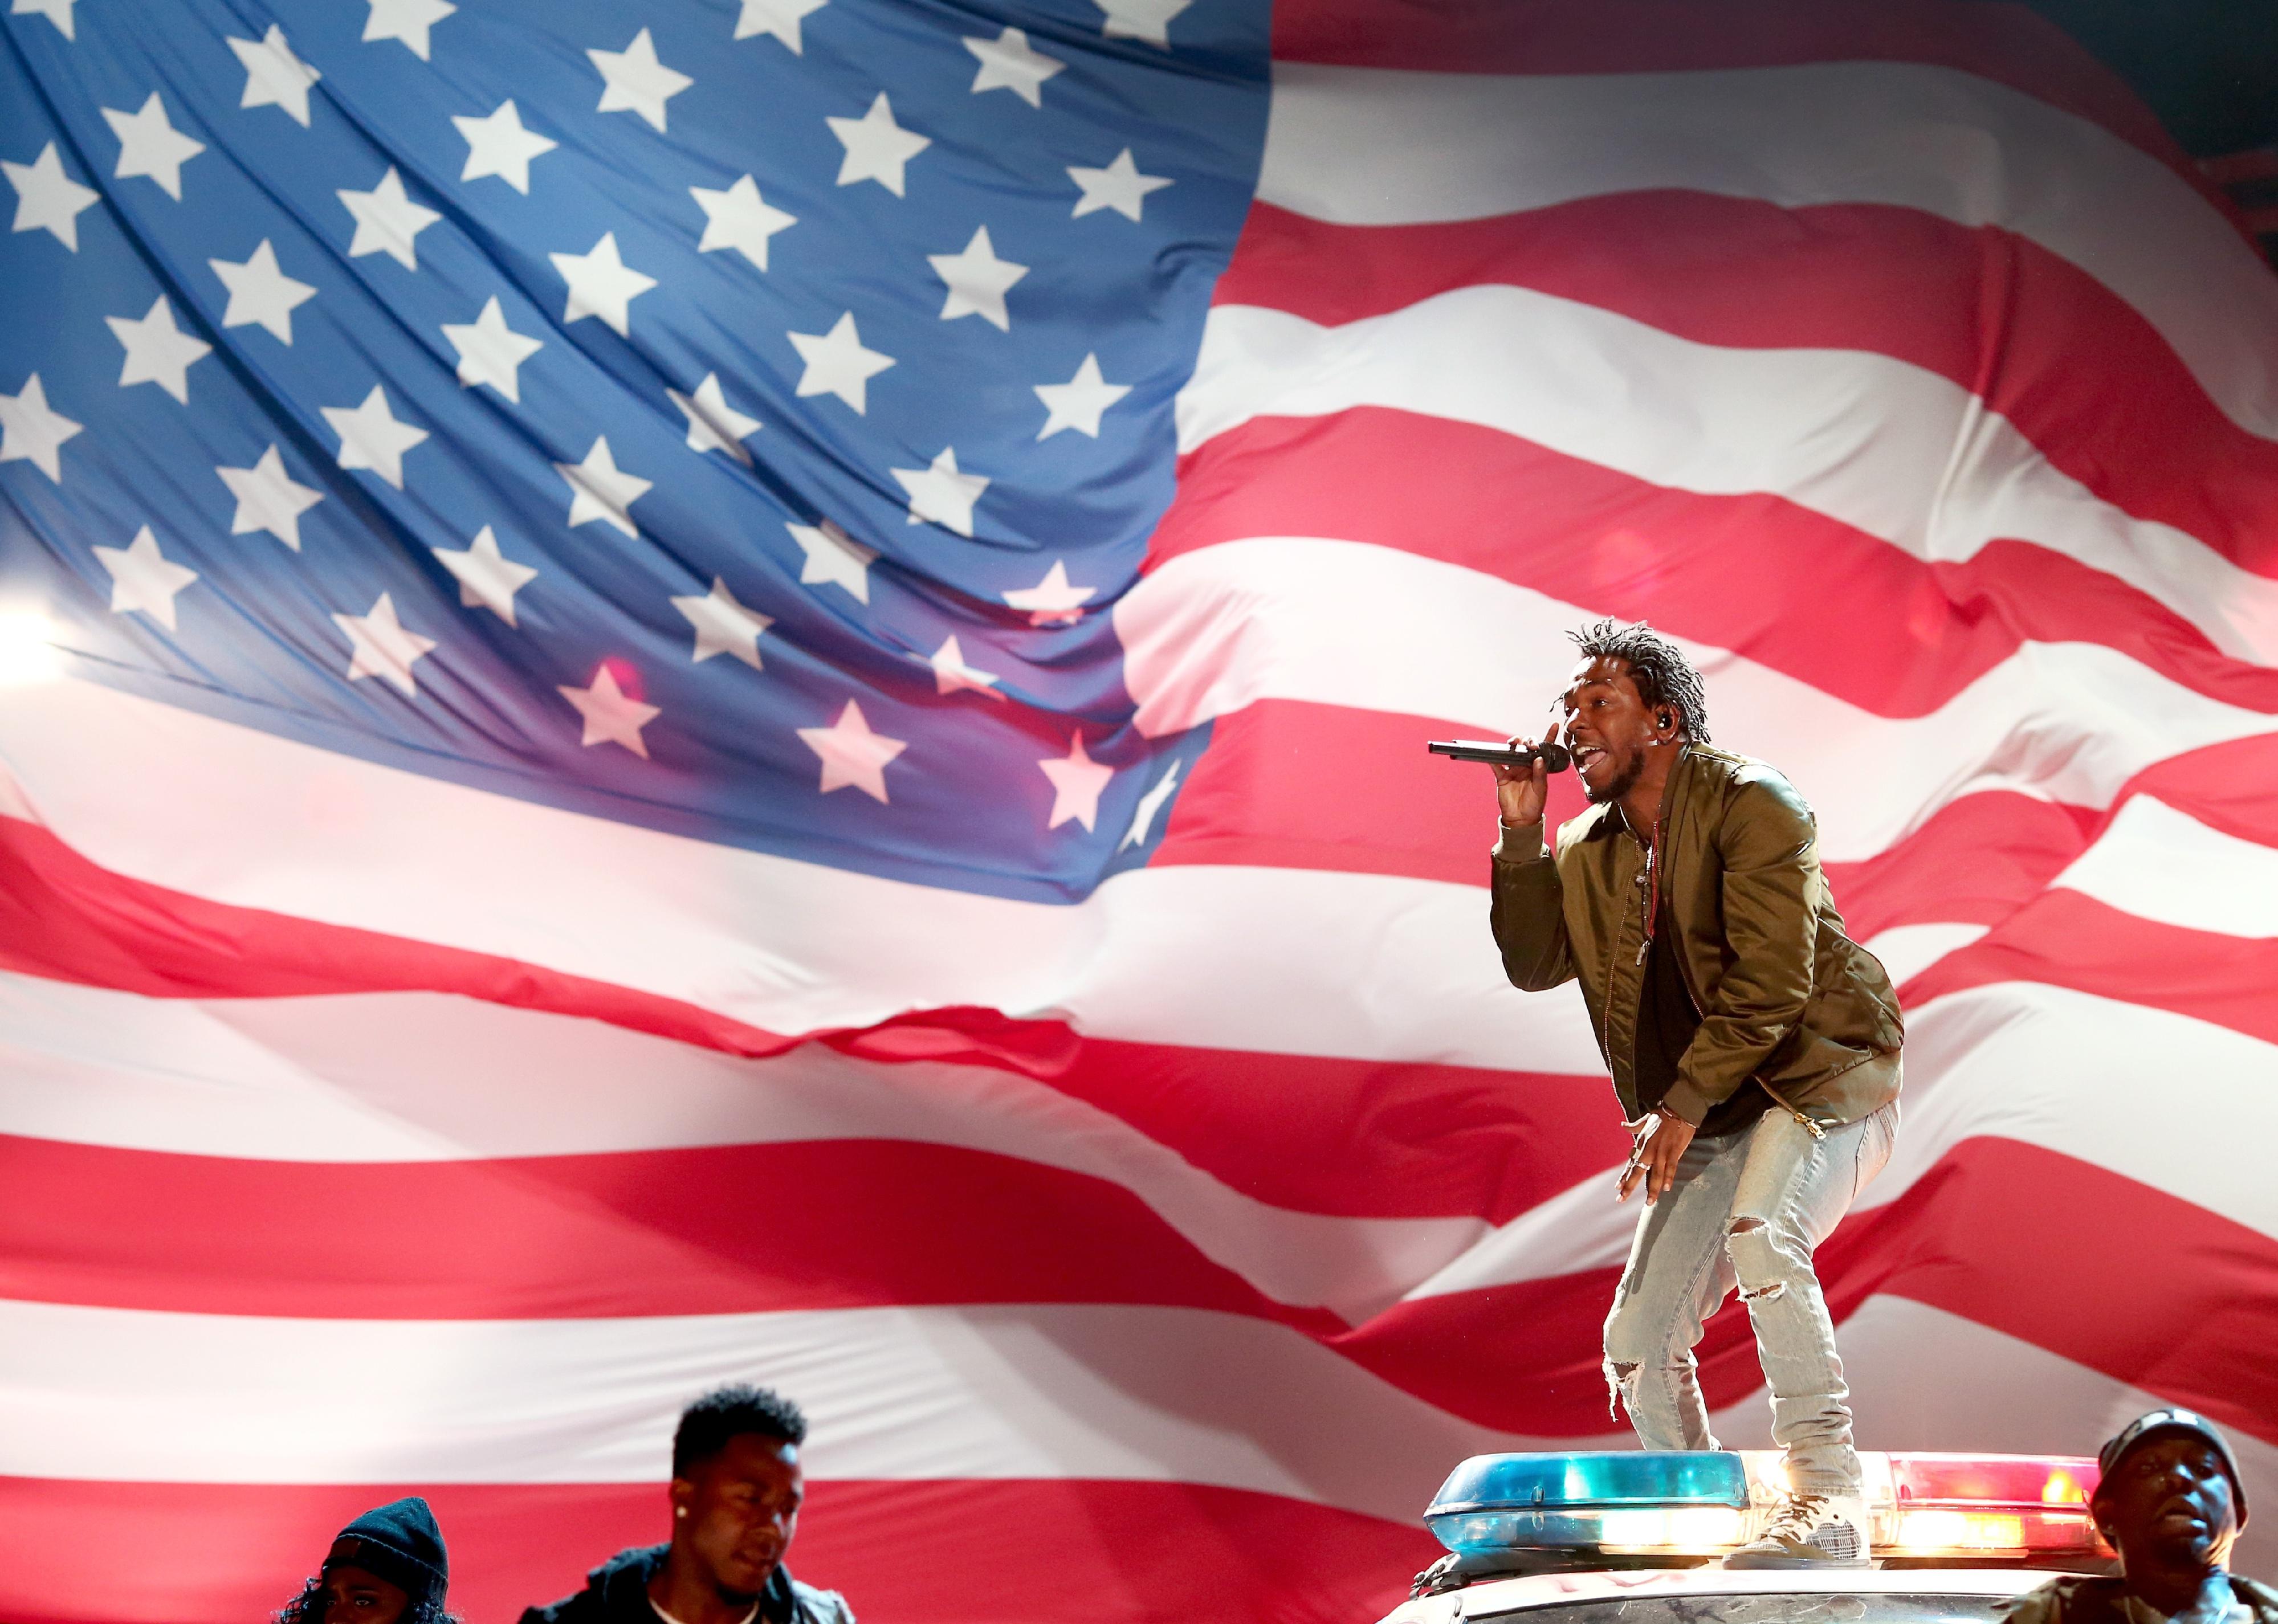 Kendrick Lamar raps in front of an American flag